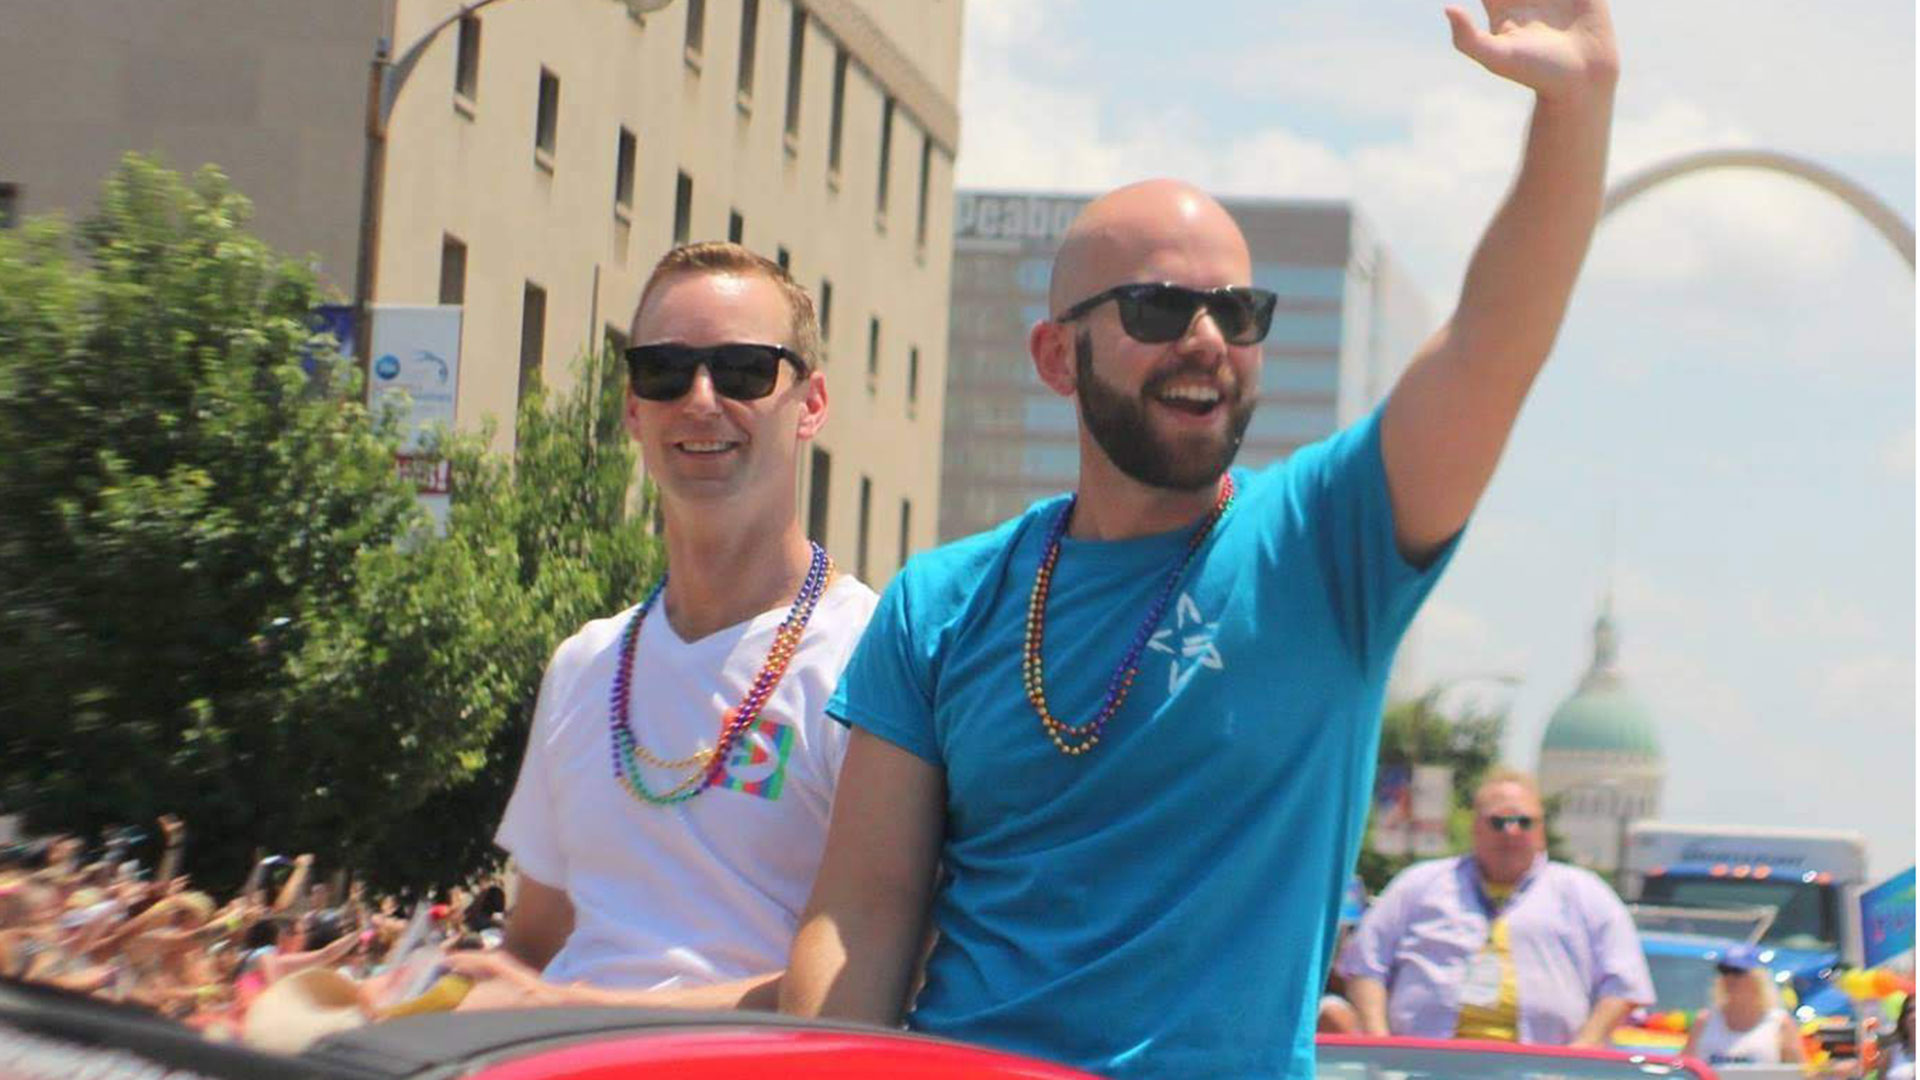 Andrew Shaughnessey rides in Pride parade